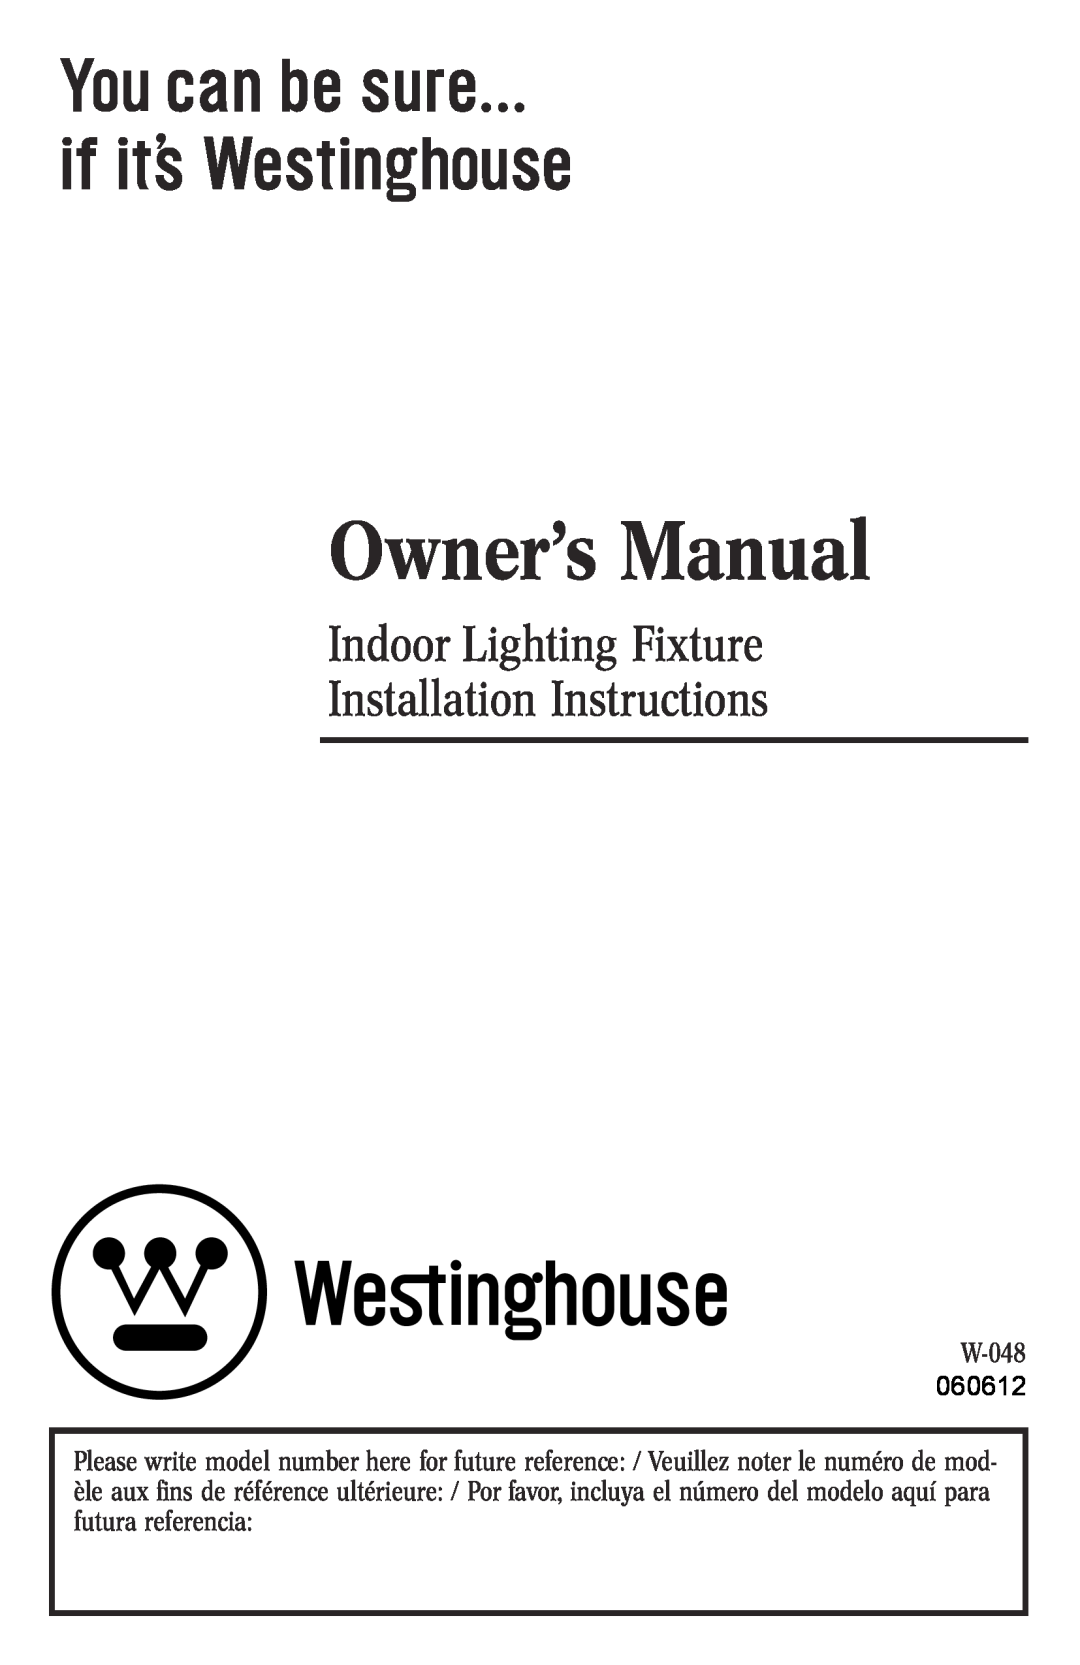 Westinghouse W-048 owner manual Indoor Lighting Fixture Installation Instructions 